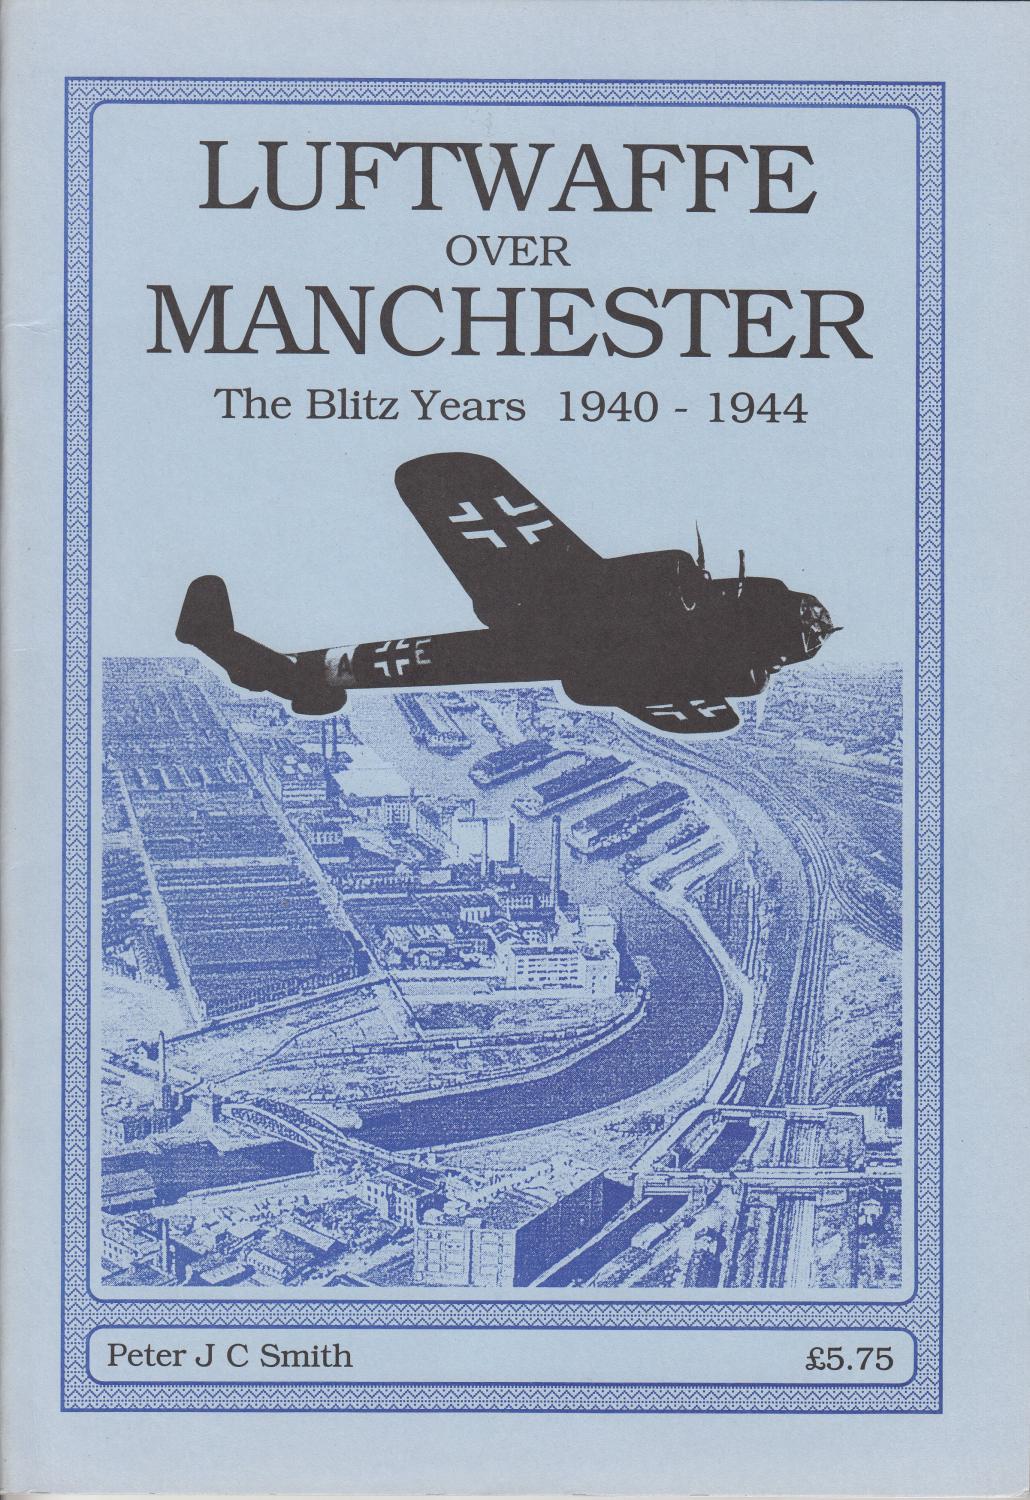 Luftwaffe over Manchester : The Blitz Years 1940-1944 - Smith, Peter J. C.